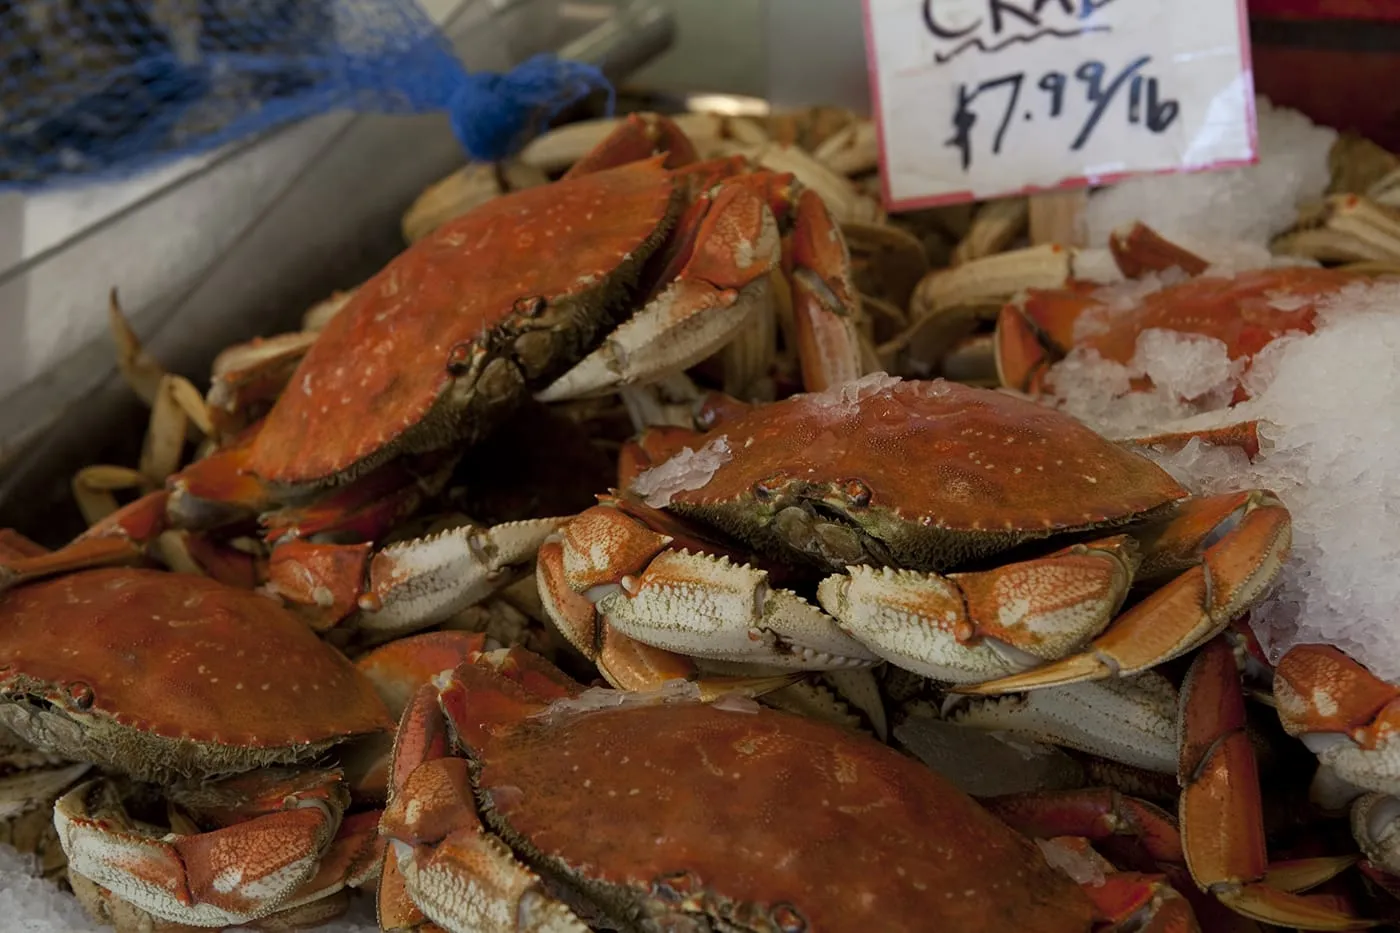 Crabs for sale at Pike Place Market in Seattle, Washington.